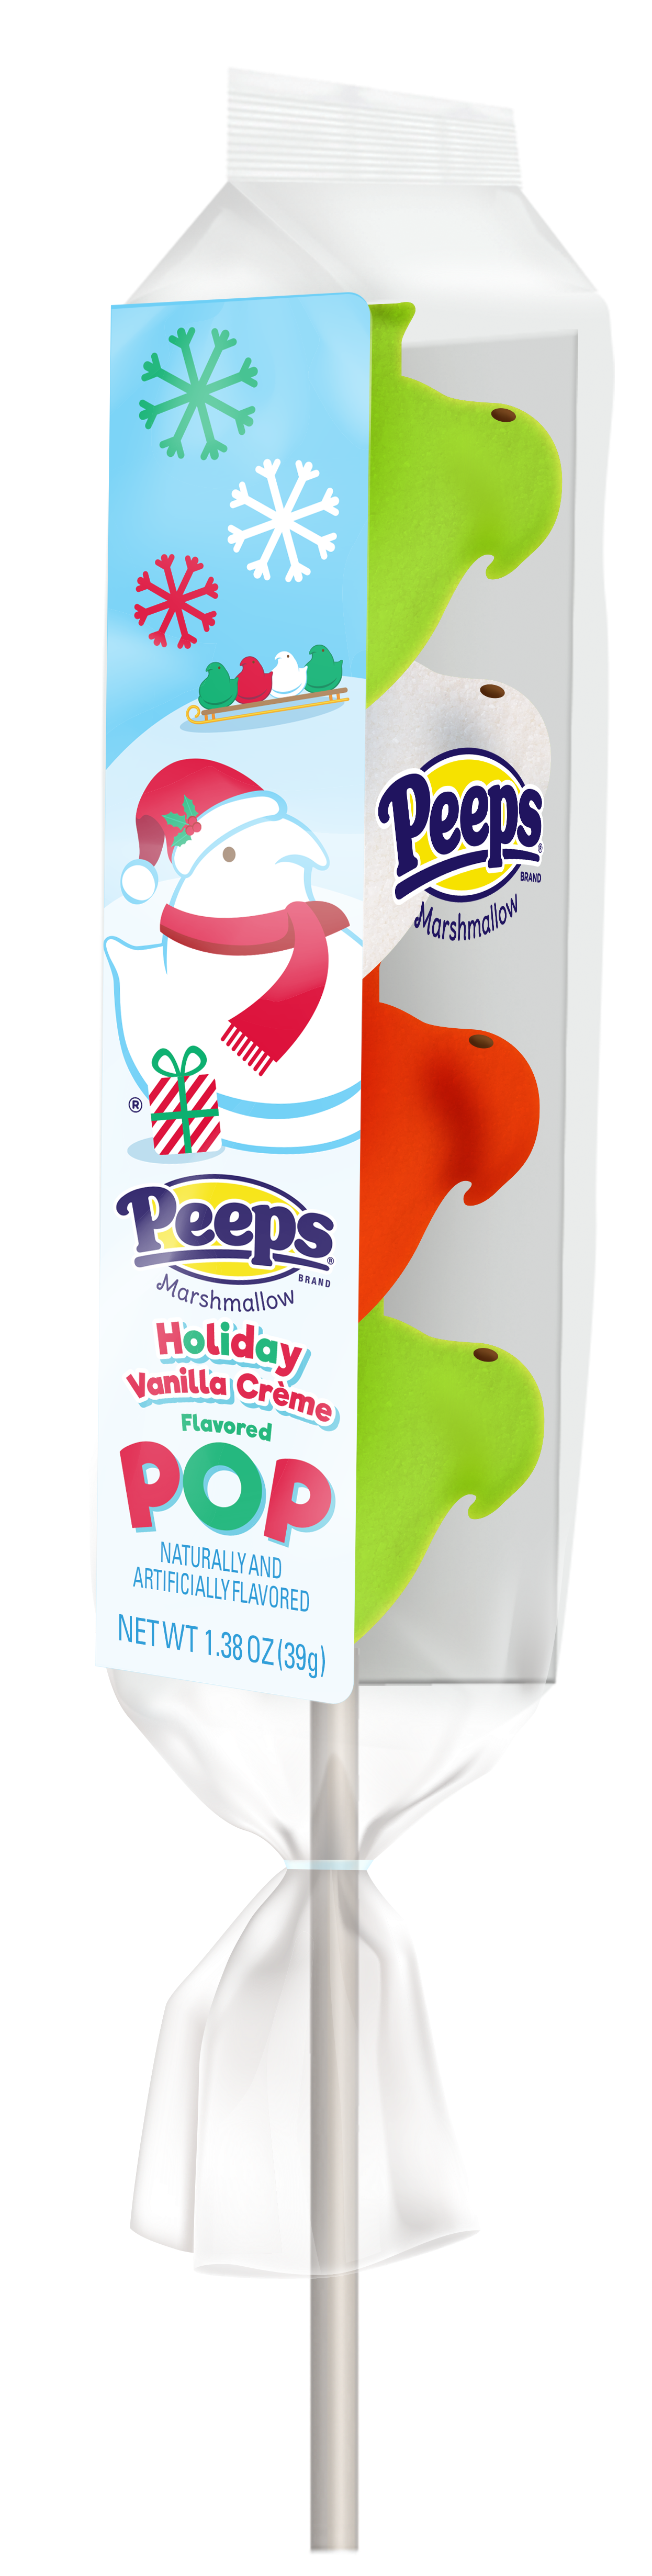 Peeps holiday pop 4 count